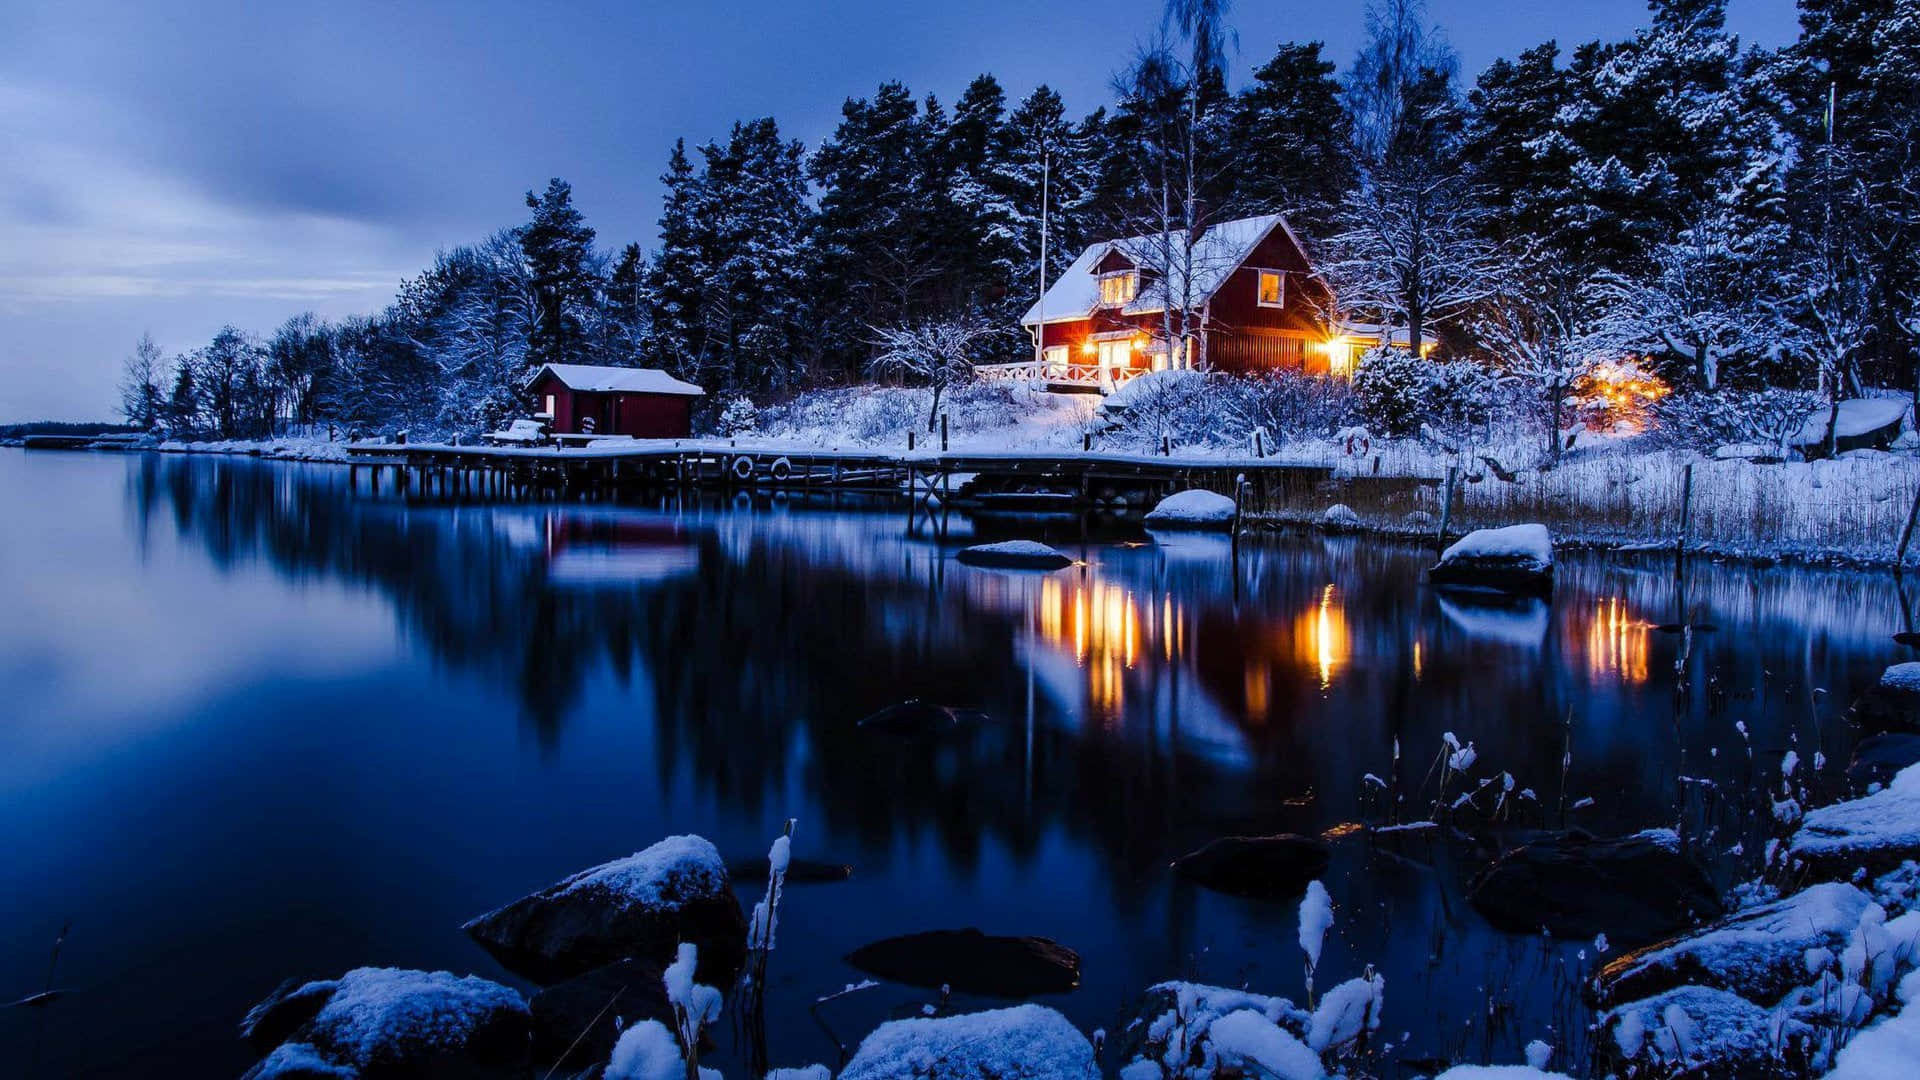 Beautiful winter scene in the snow-covered countryside.